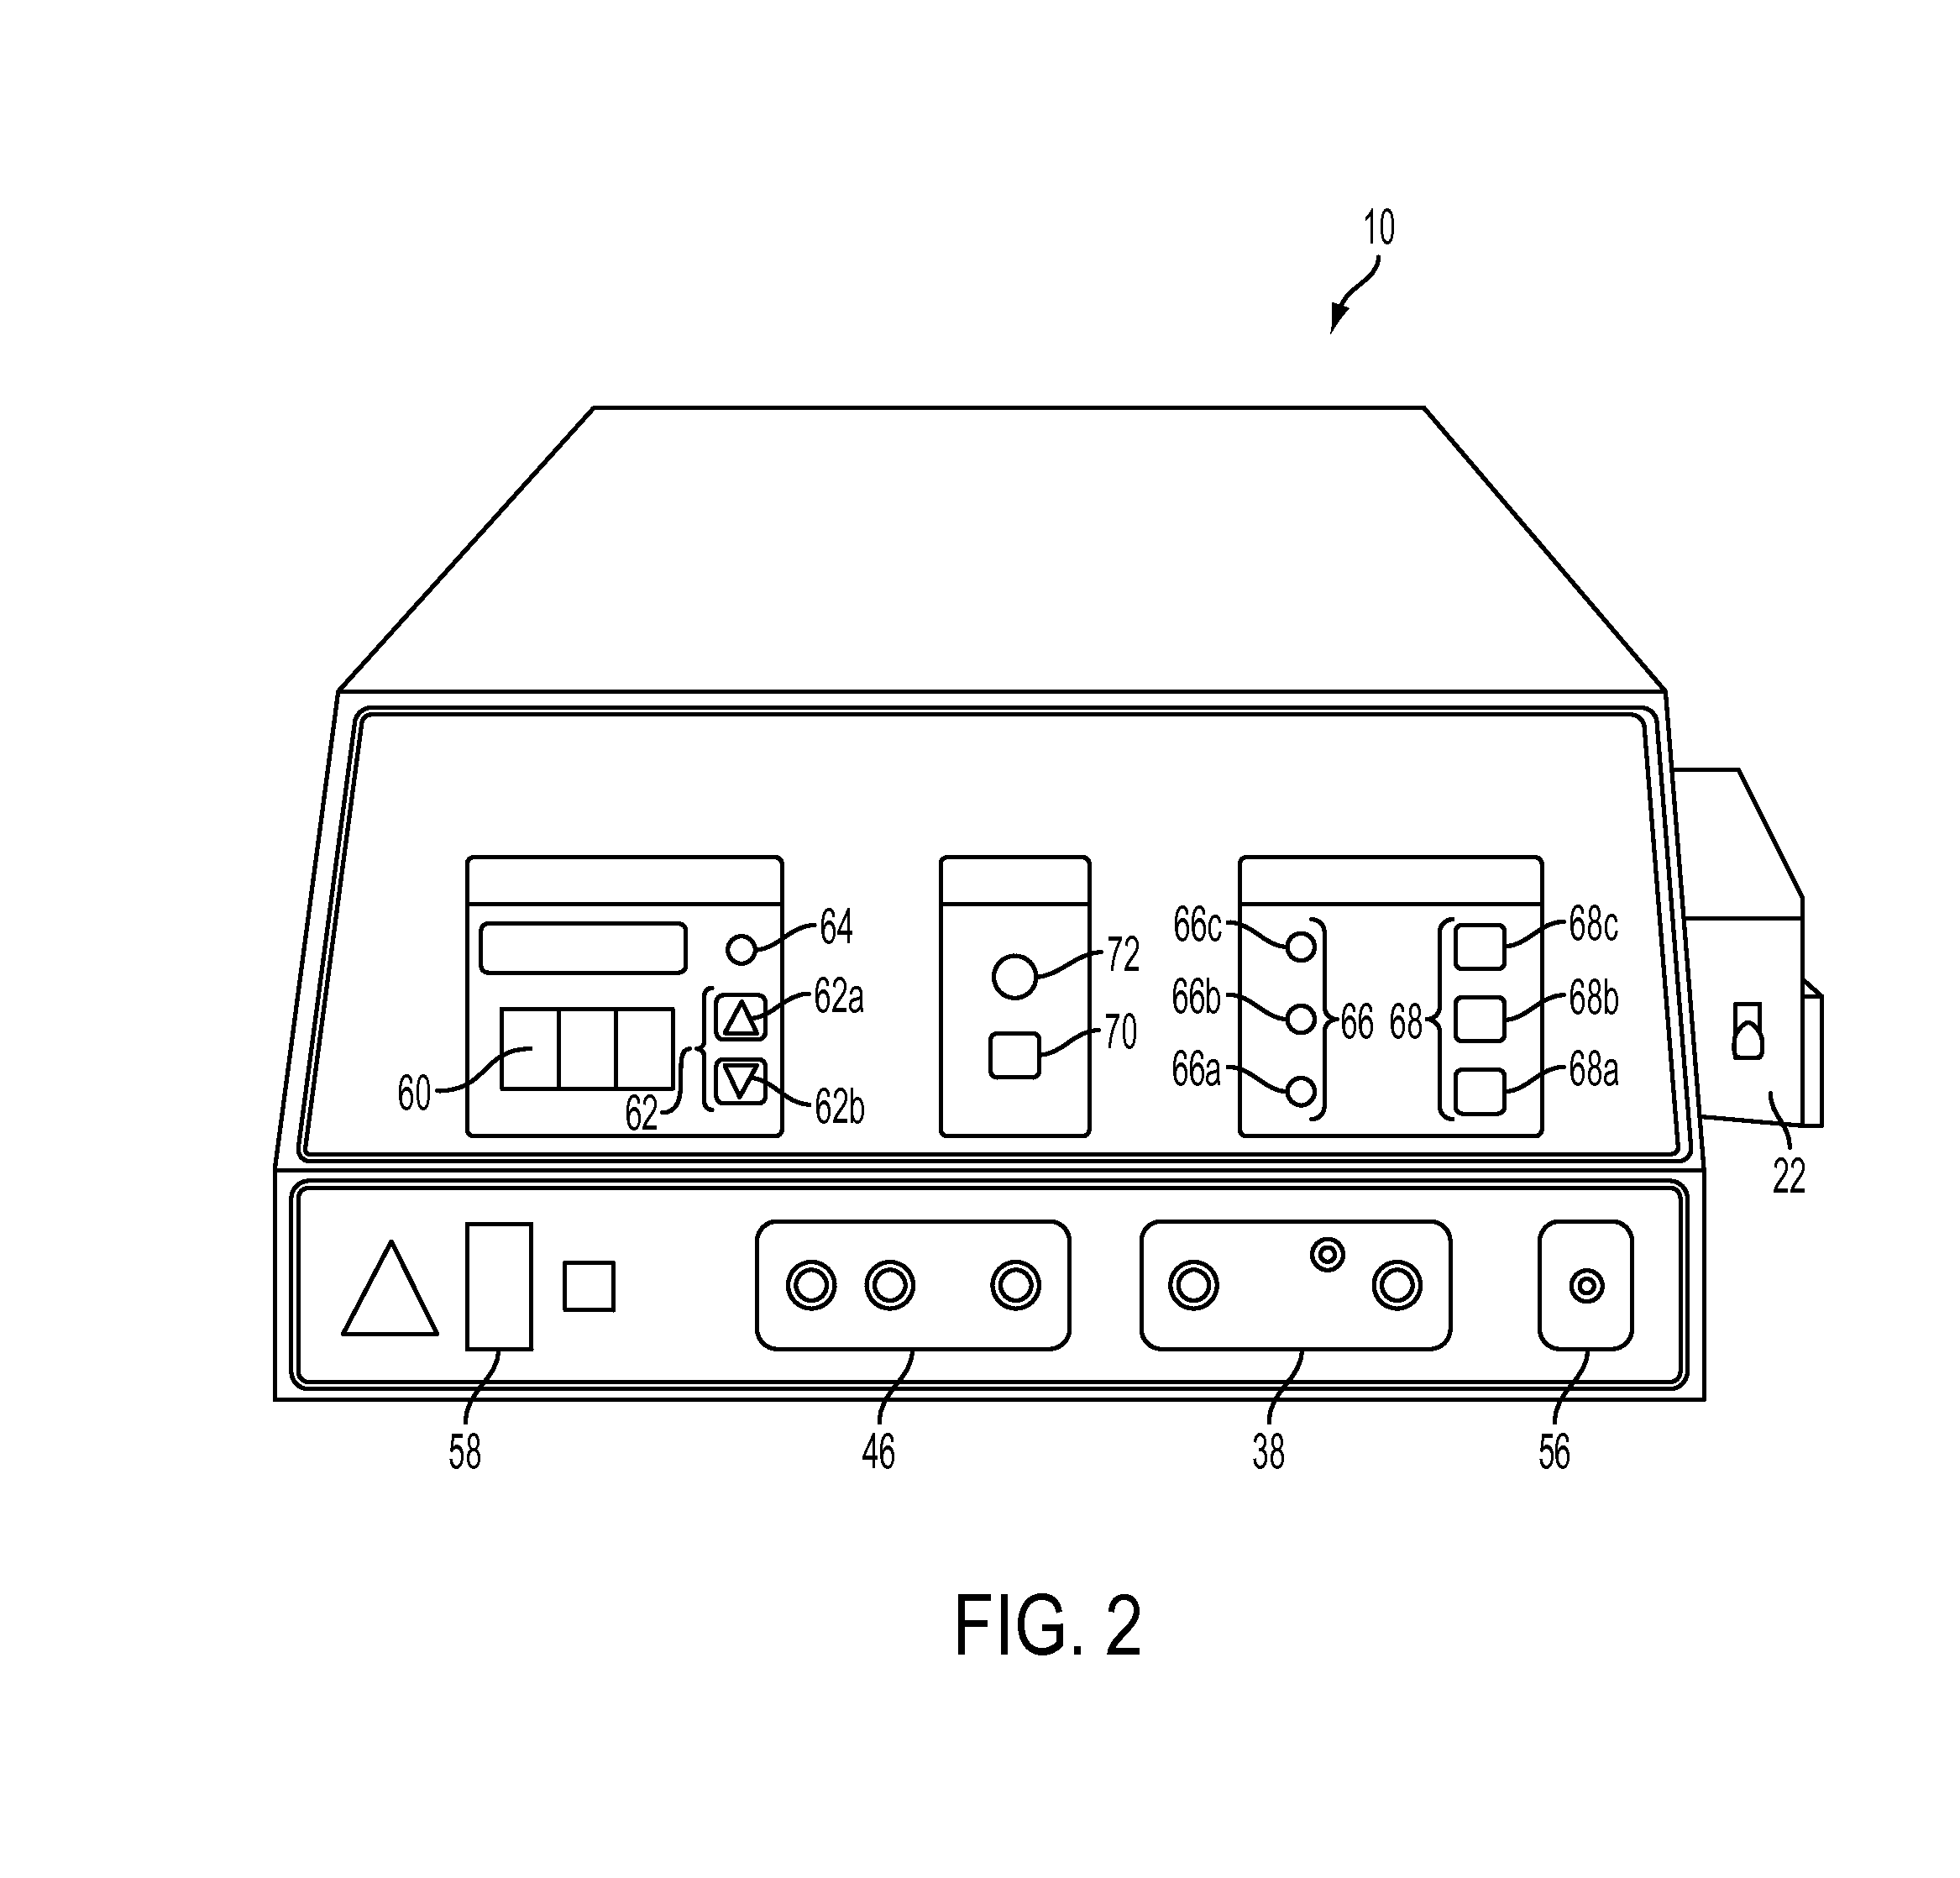 Fluid-assisted electrosurgical device